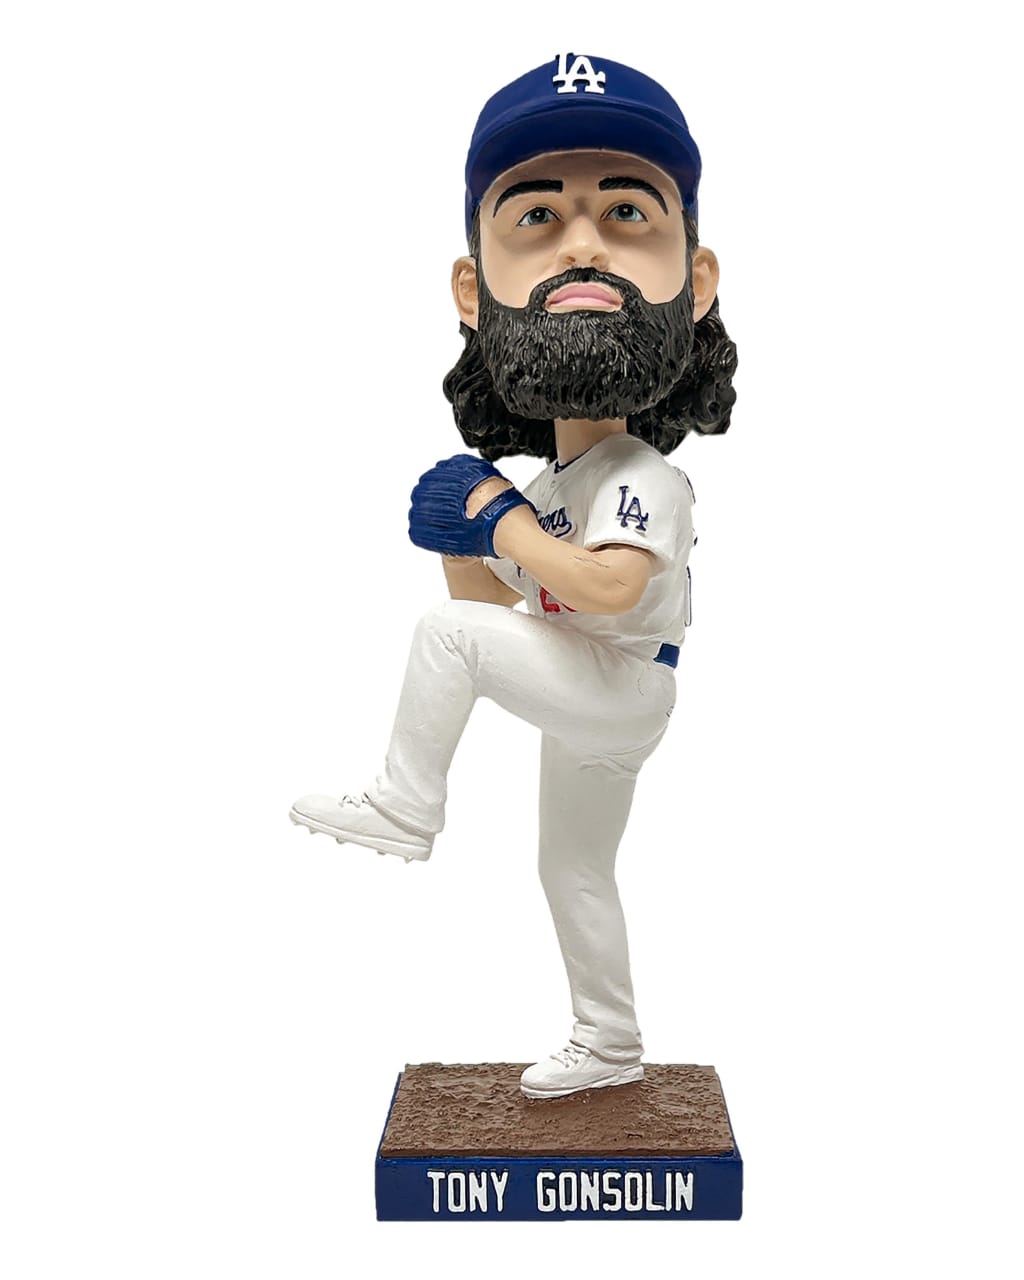 Los Angeles Dodgers - ‪It's Manny Mota Bobblehead Night presented by Jack  in the Box!